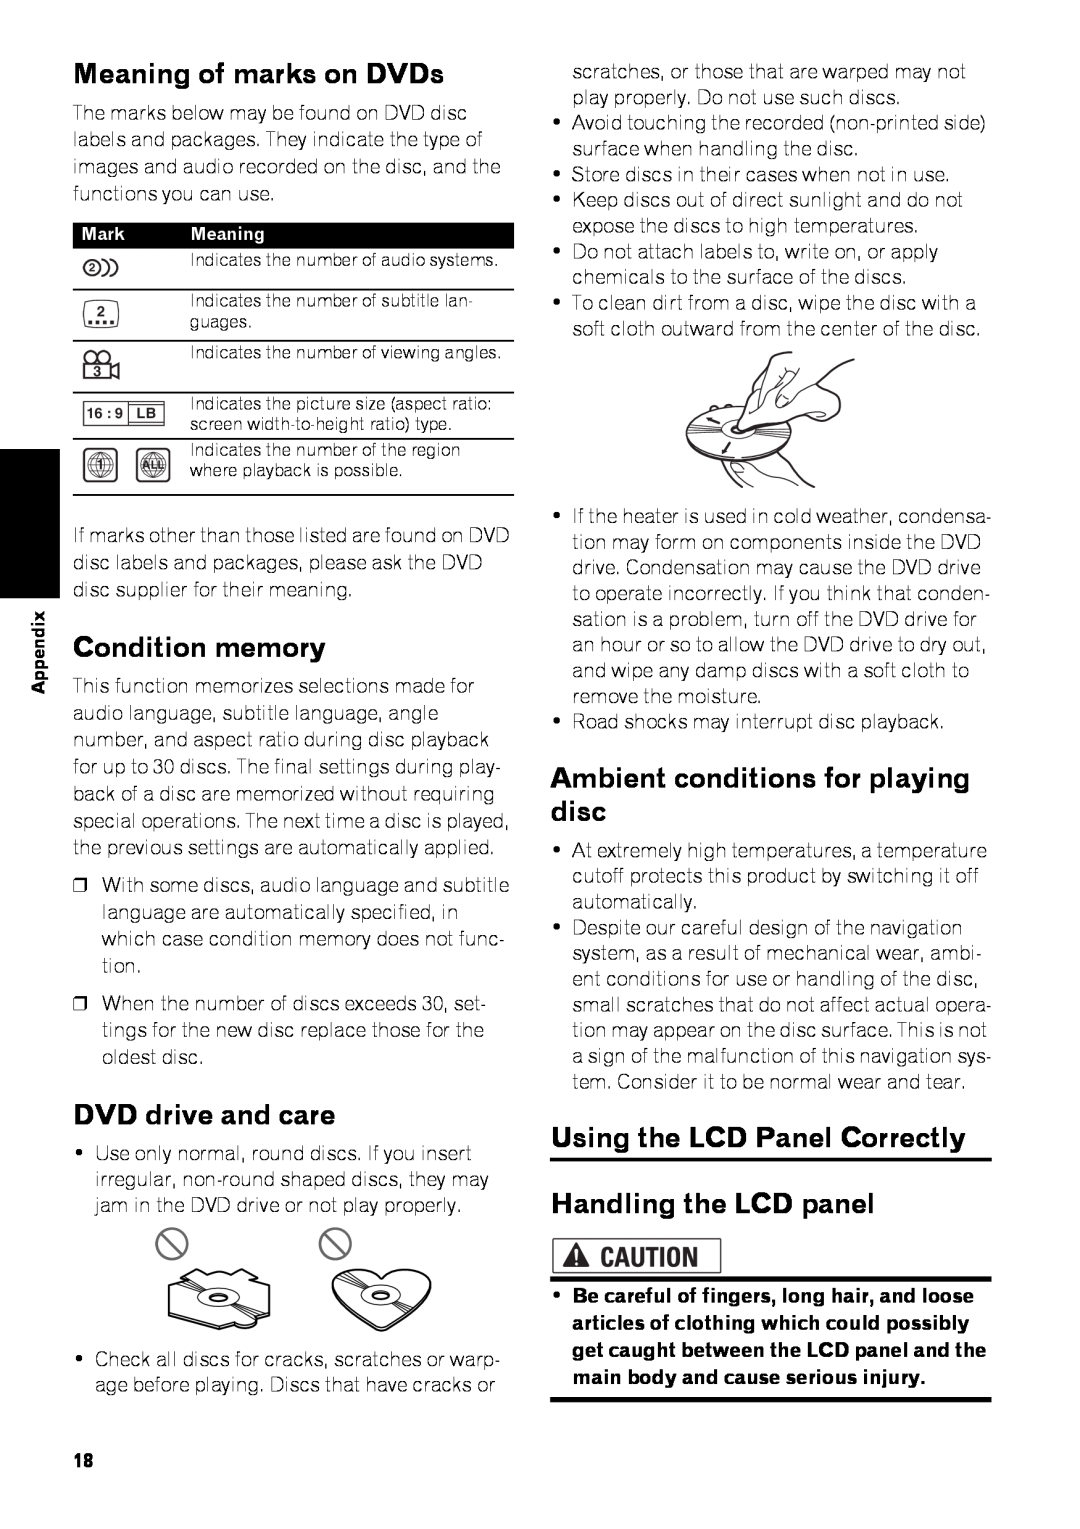 Pioneer AVIC-Z3 manual Meaning of marks on DVDs, Condition memory, DVD drive and care, Ambient conditions for playing disc 